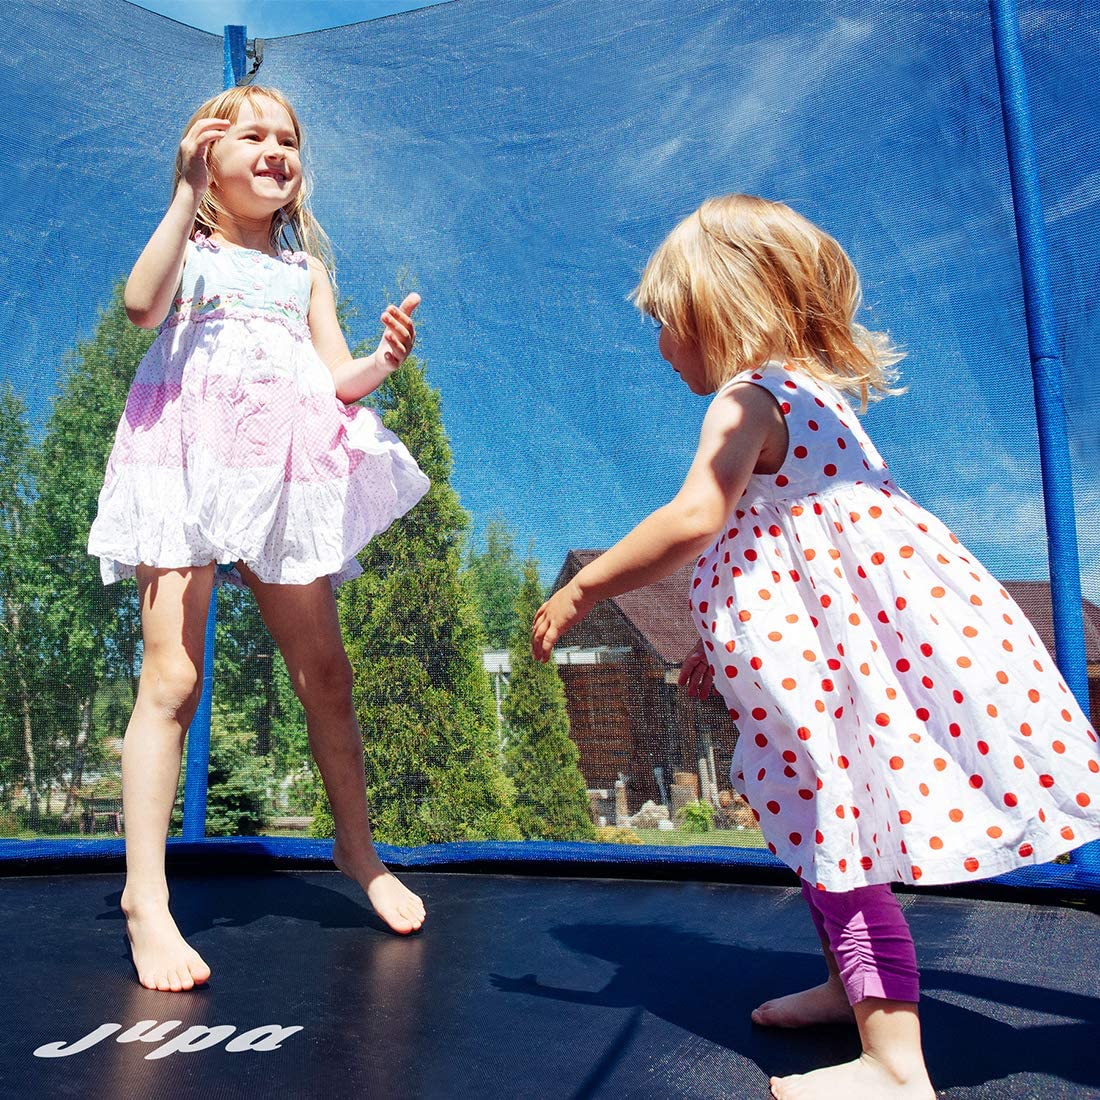 best safest trampolines to buy reviews guide